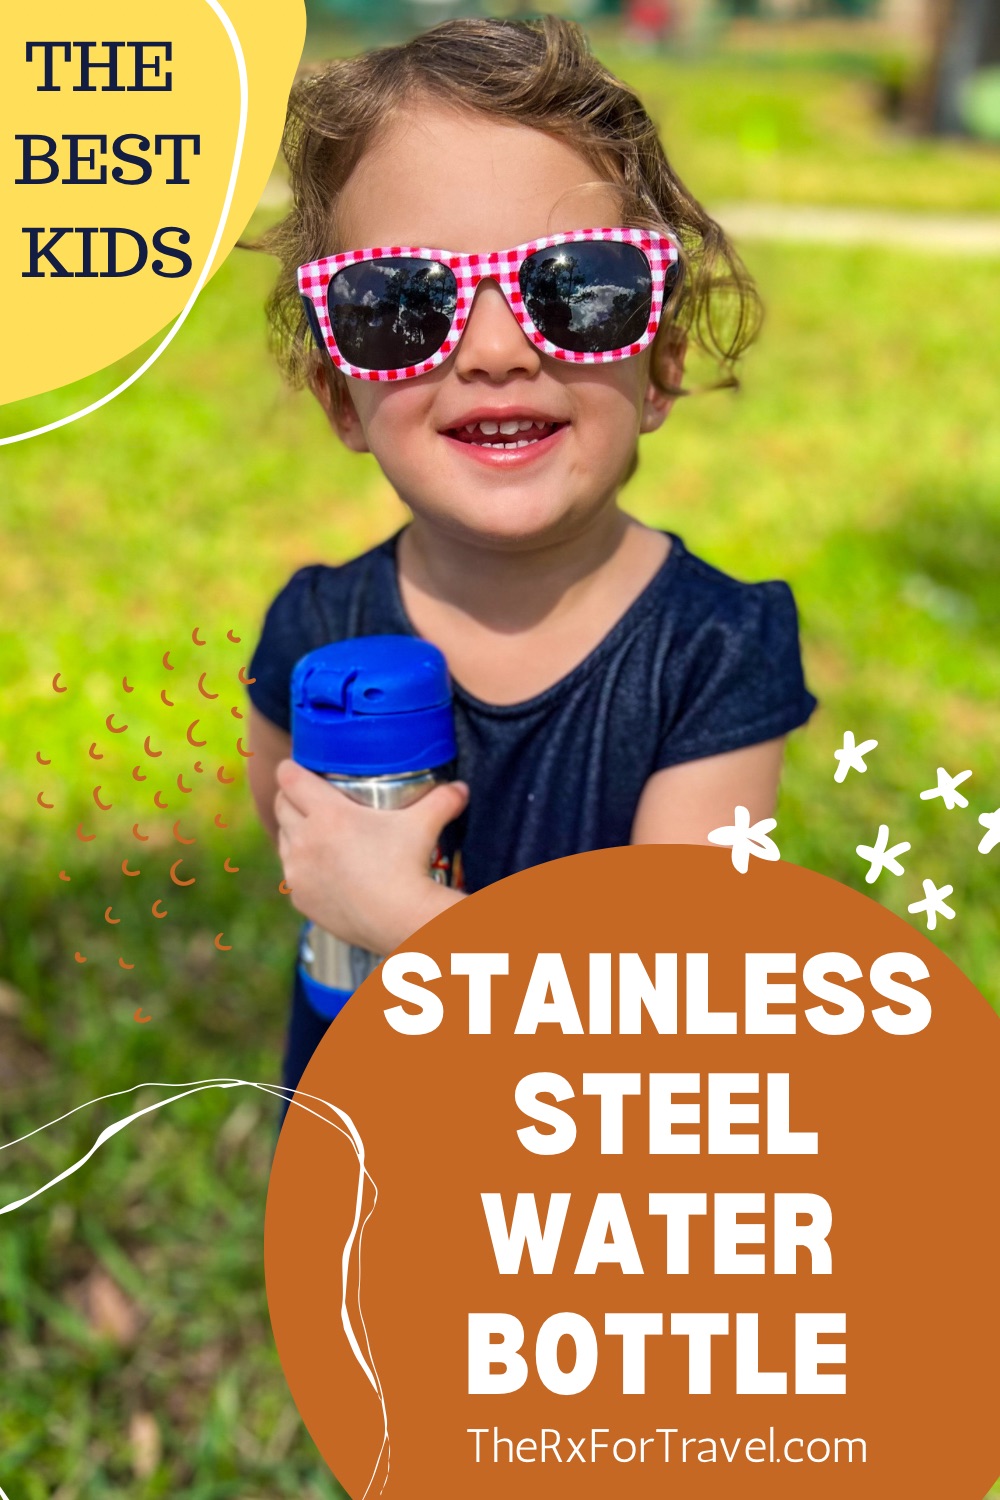 The best stainless steel water bottle for toddlers is Thermos brand hands down and I’m going to explain all the reasons why and where to buy it for your little one.